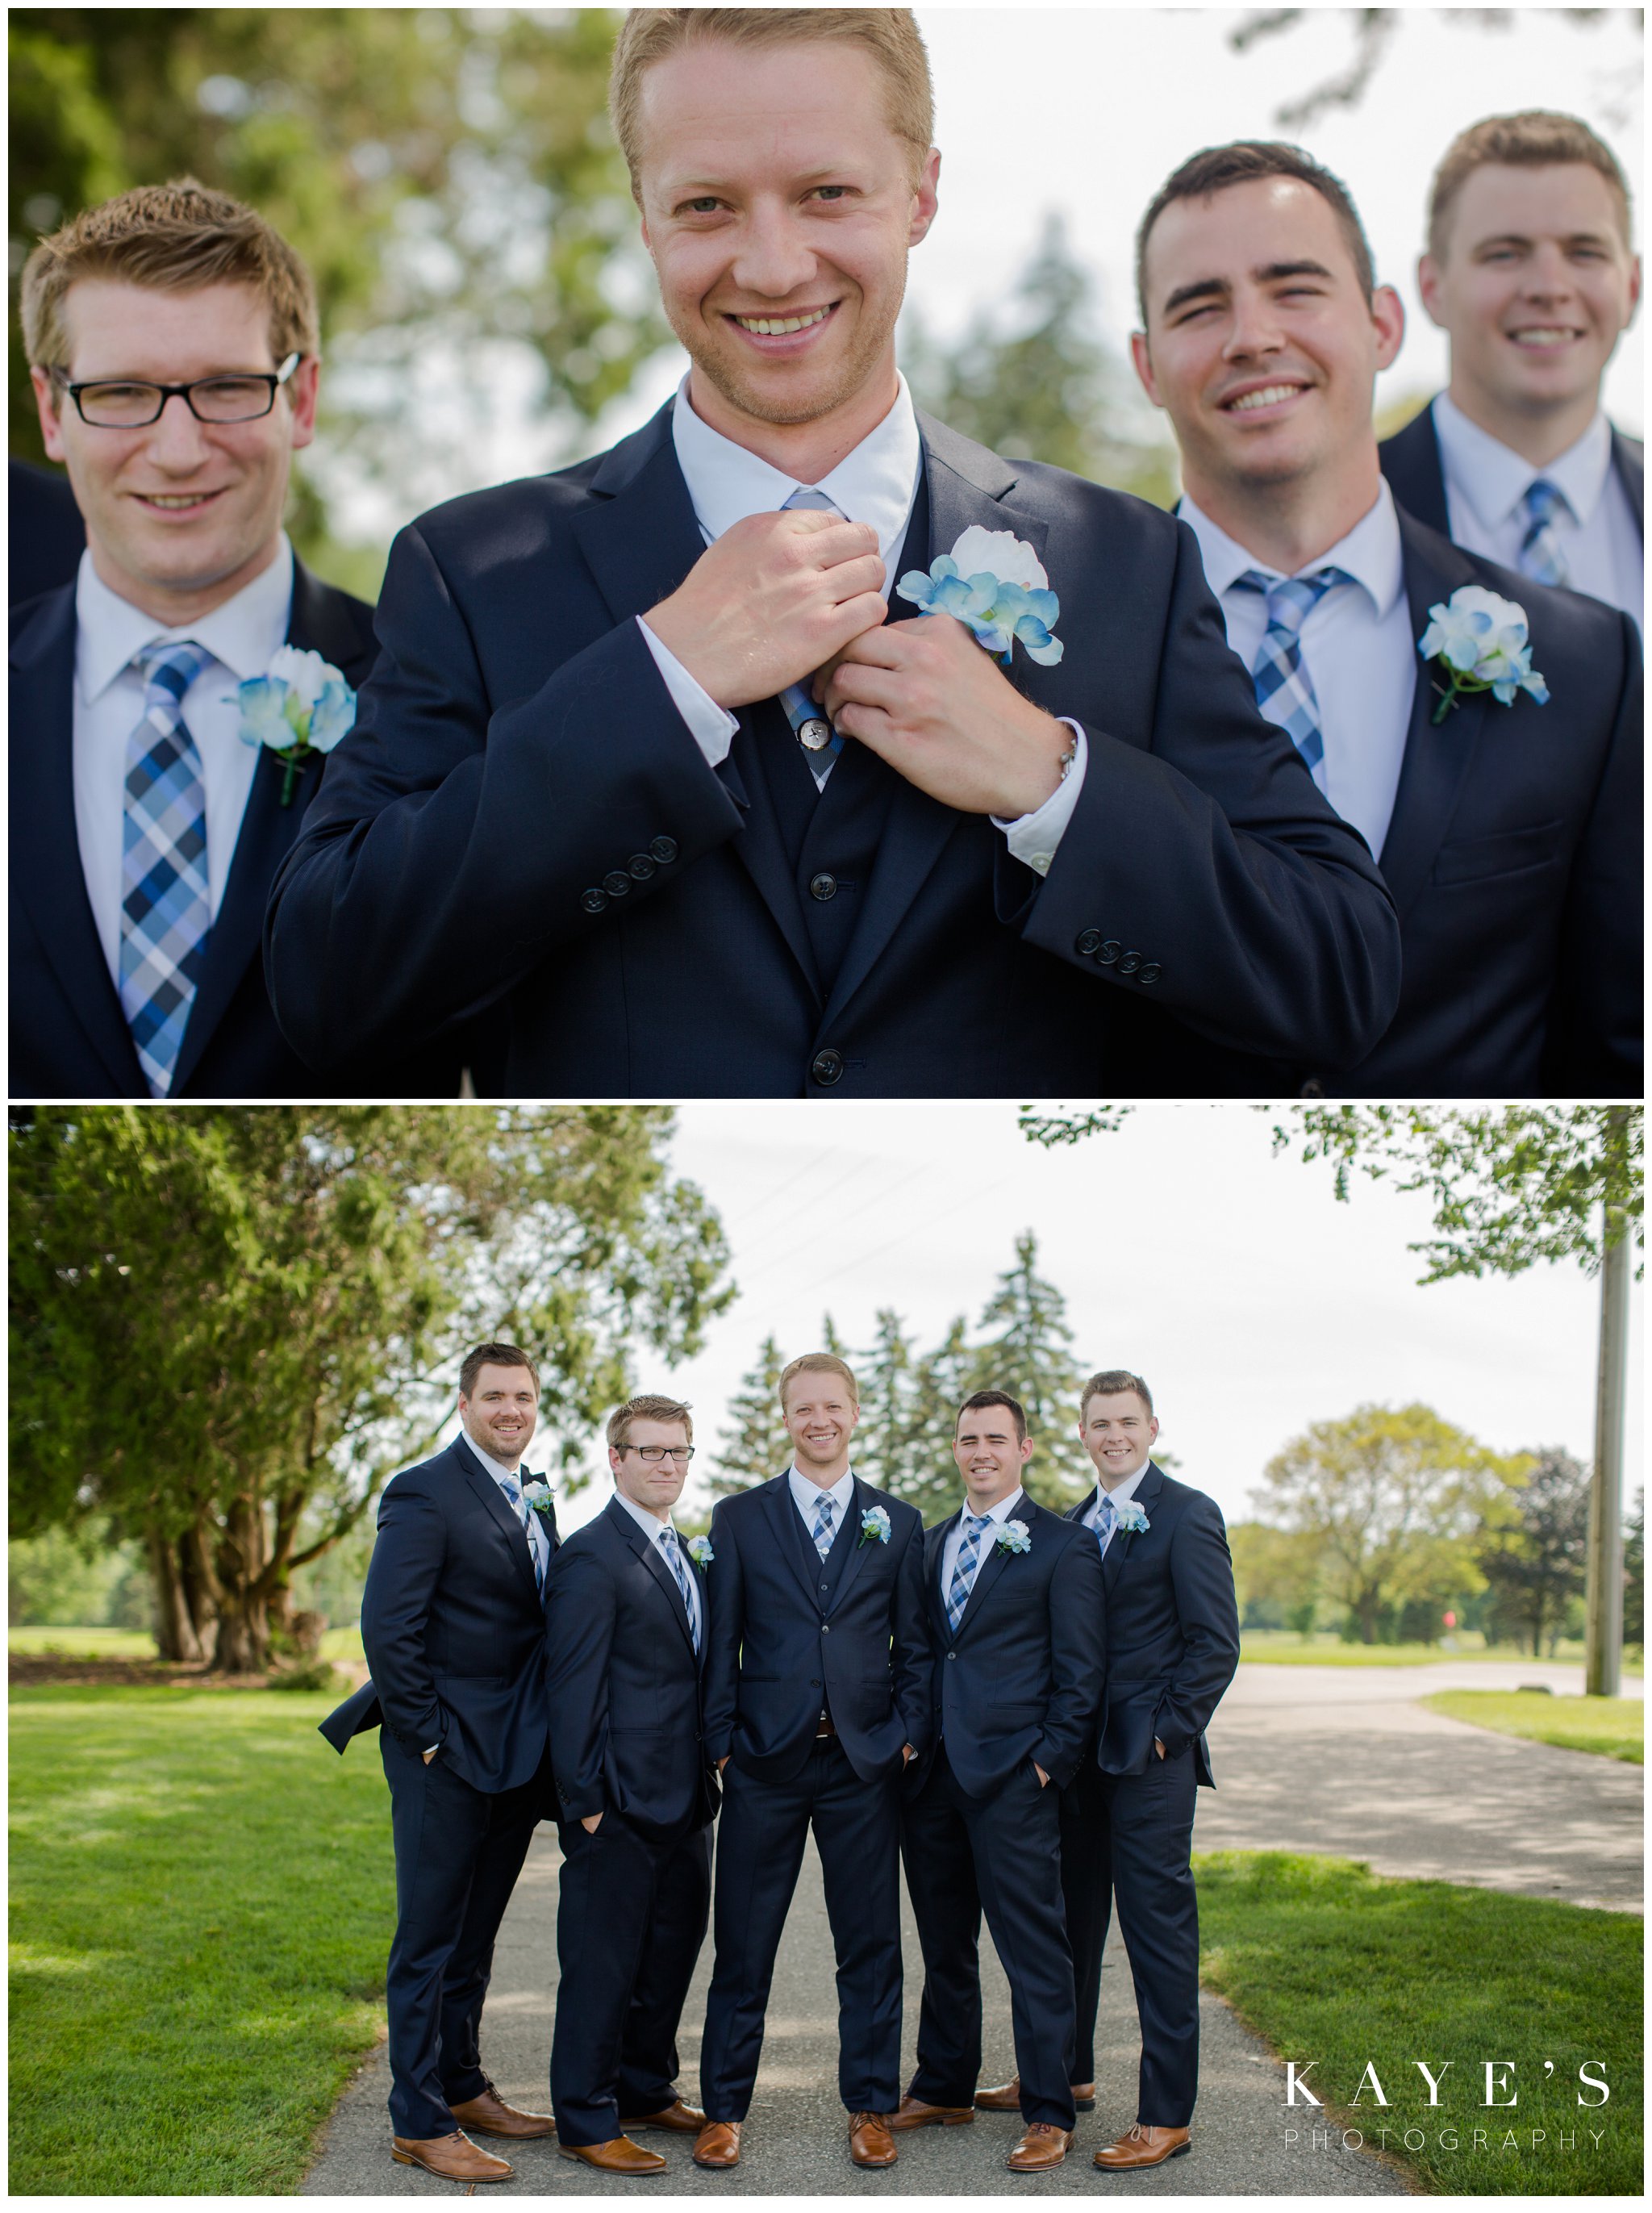 close ups of groom and groomsmen during wedding portraits at golf course wedding